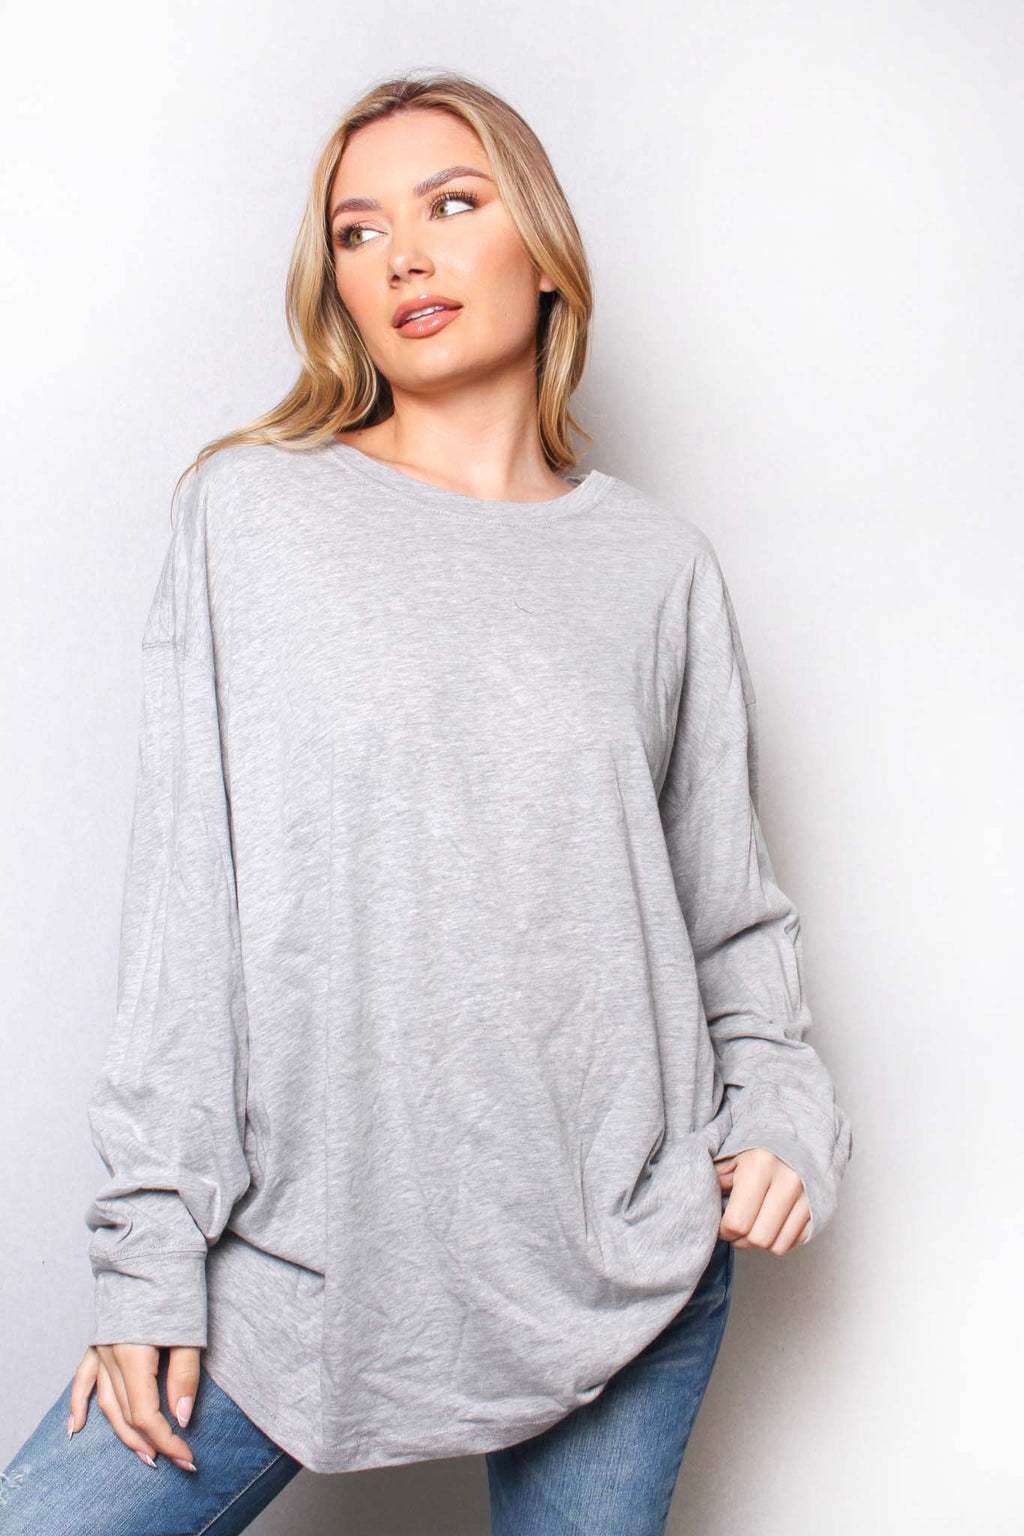 Women's Long Sleeves Round Neck Solid Sweater